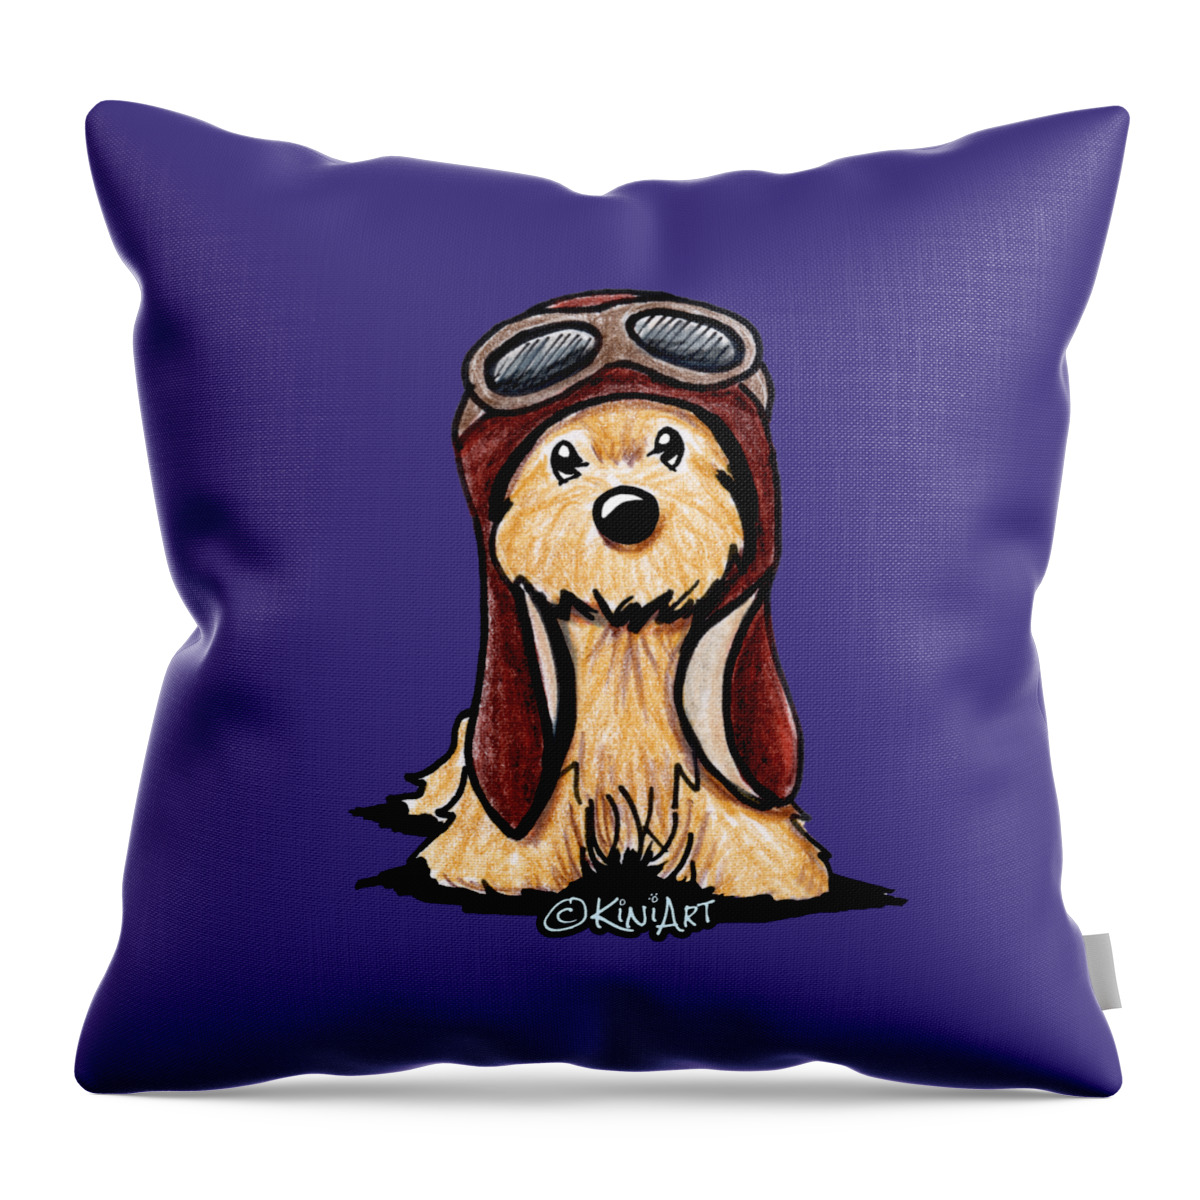 Cairn Throw Pillow featuring the drawing Cairn Terrier Pilot by Kim Niles aka KiniArt